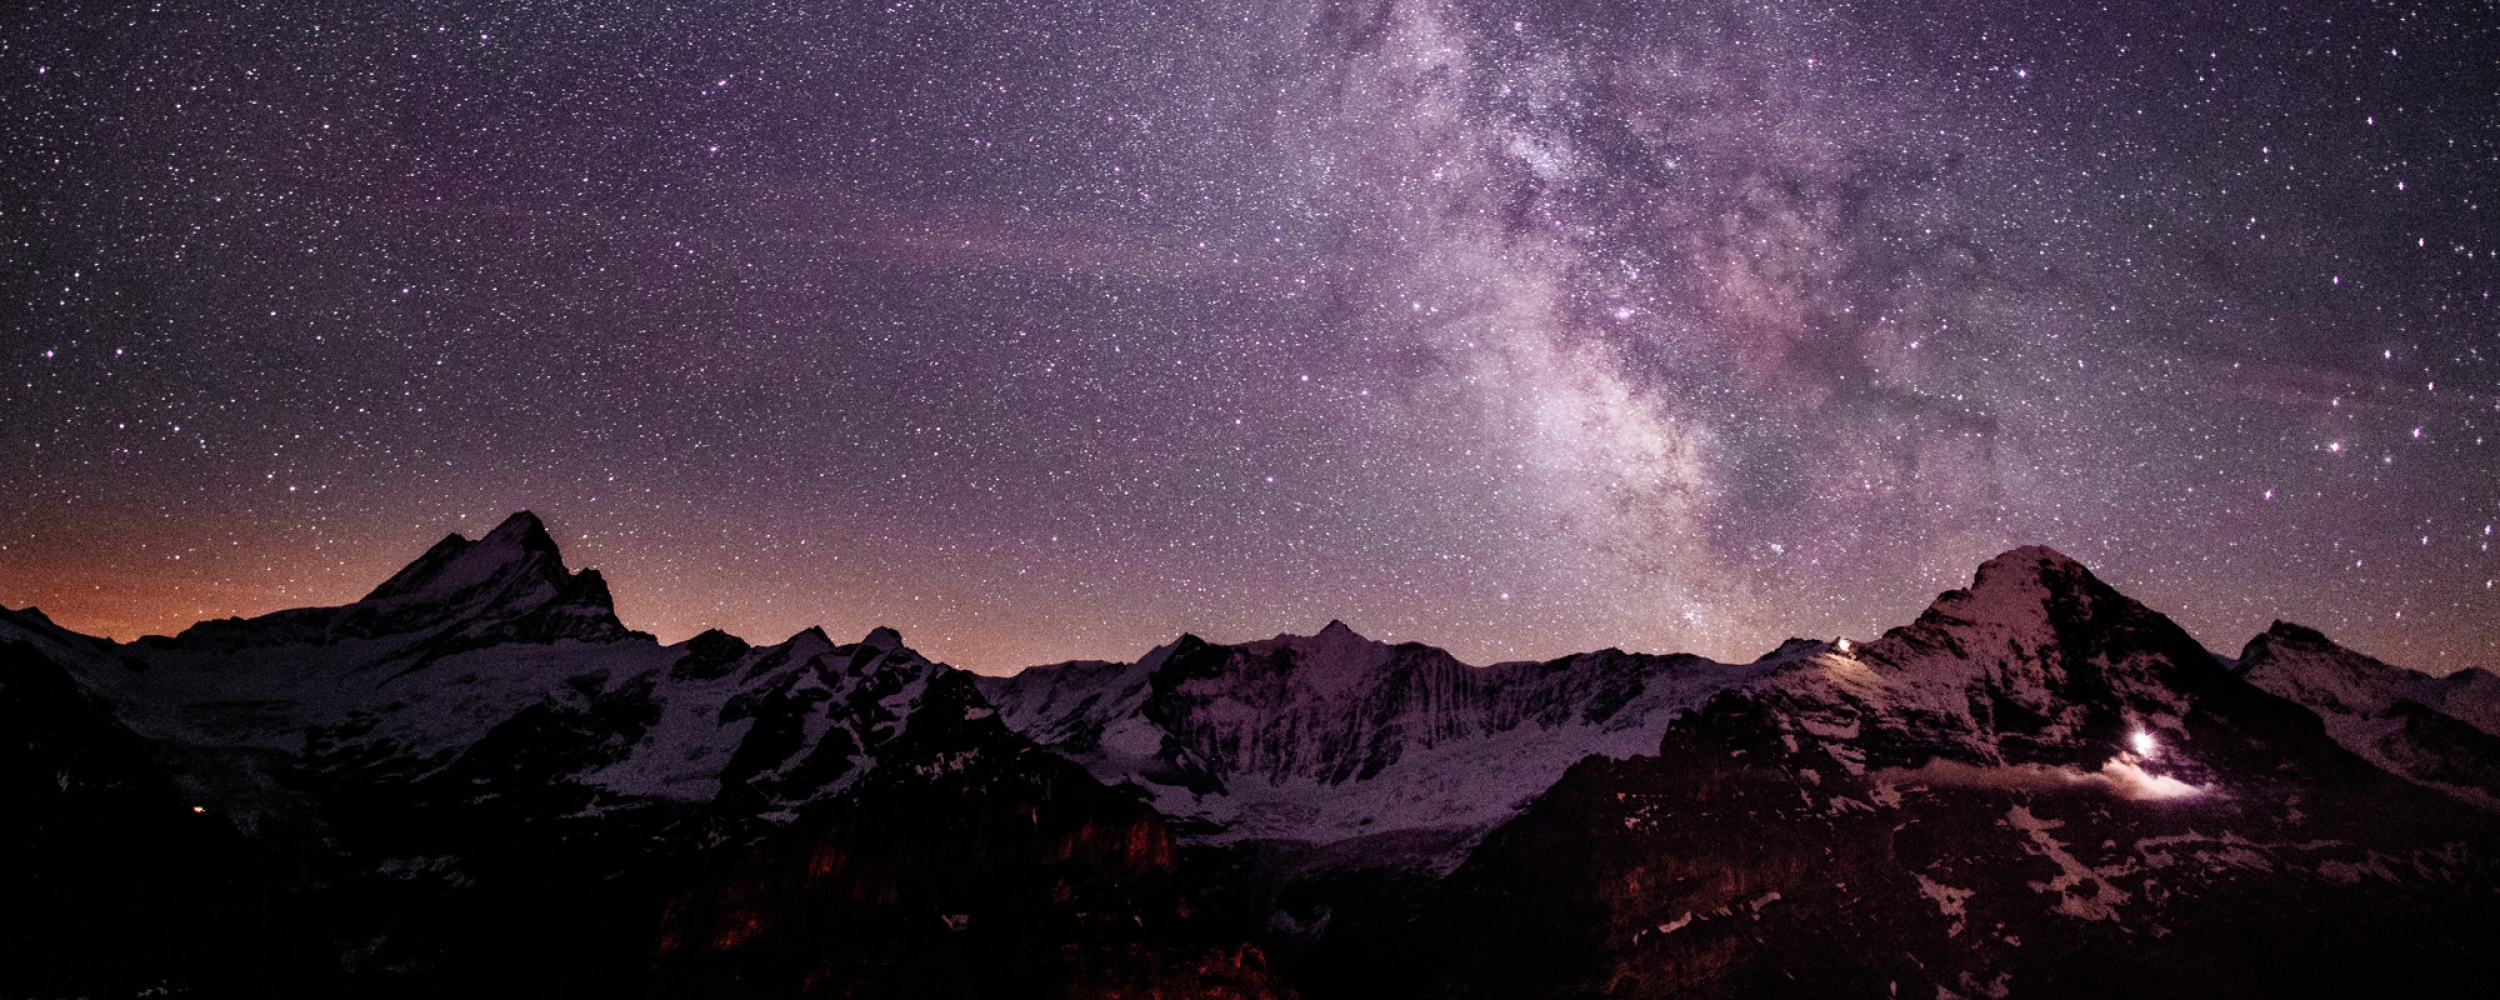 Beautiful landscape of mountains and purple and pink night skies with bright visible stars above.